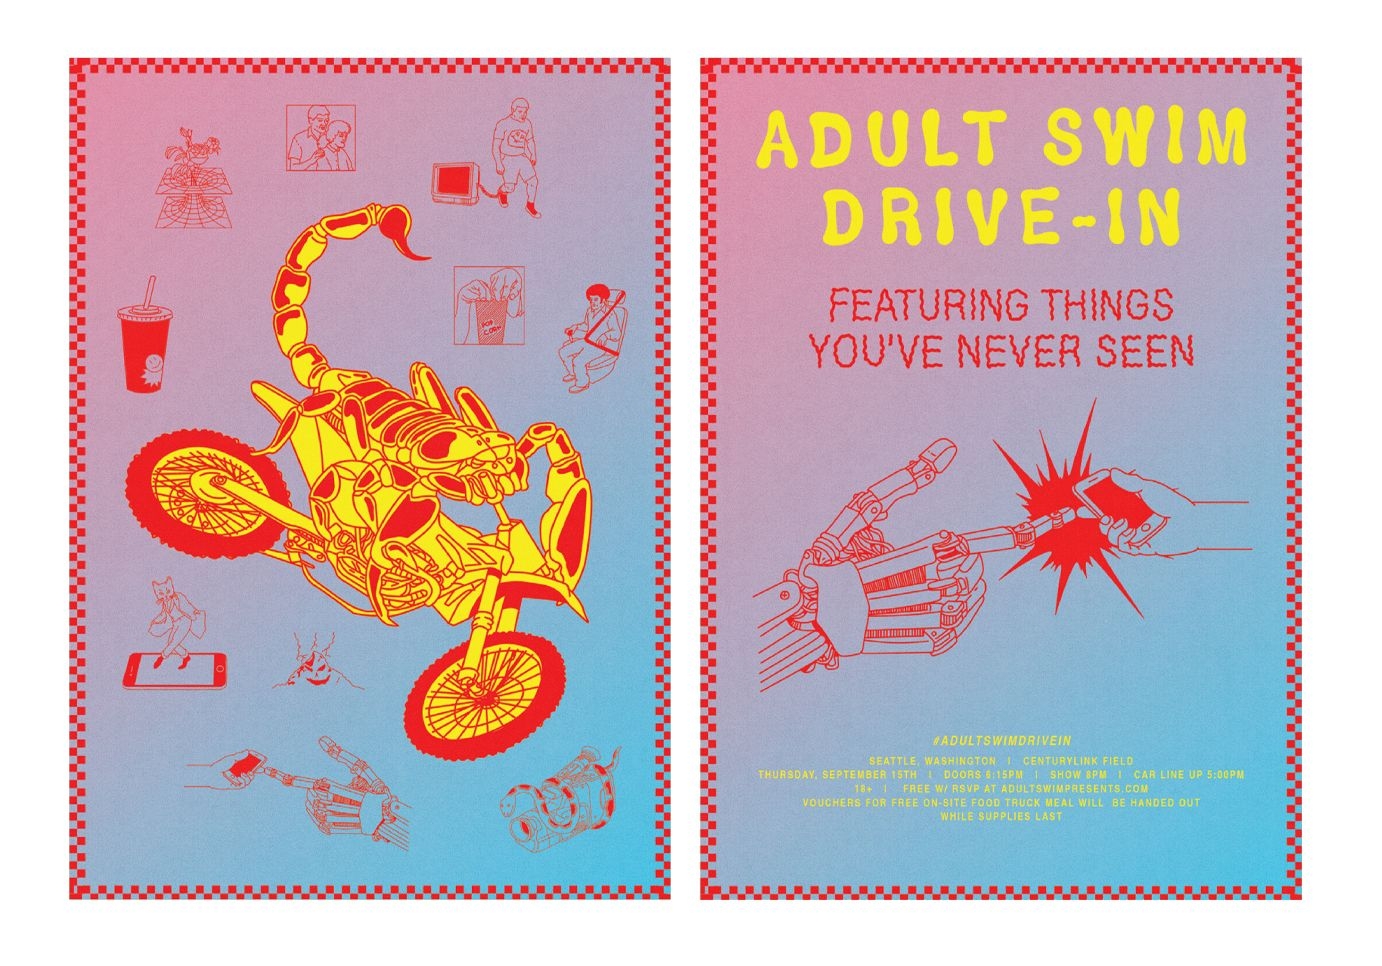 Adult Swim Drive-In flyer media reads: featuring things you've never seen